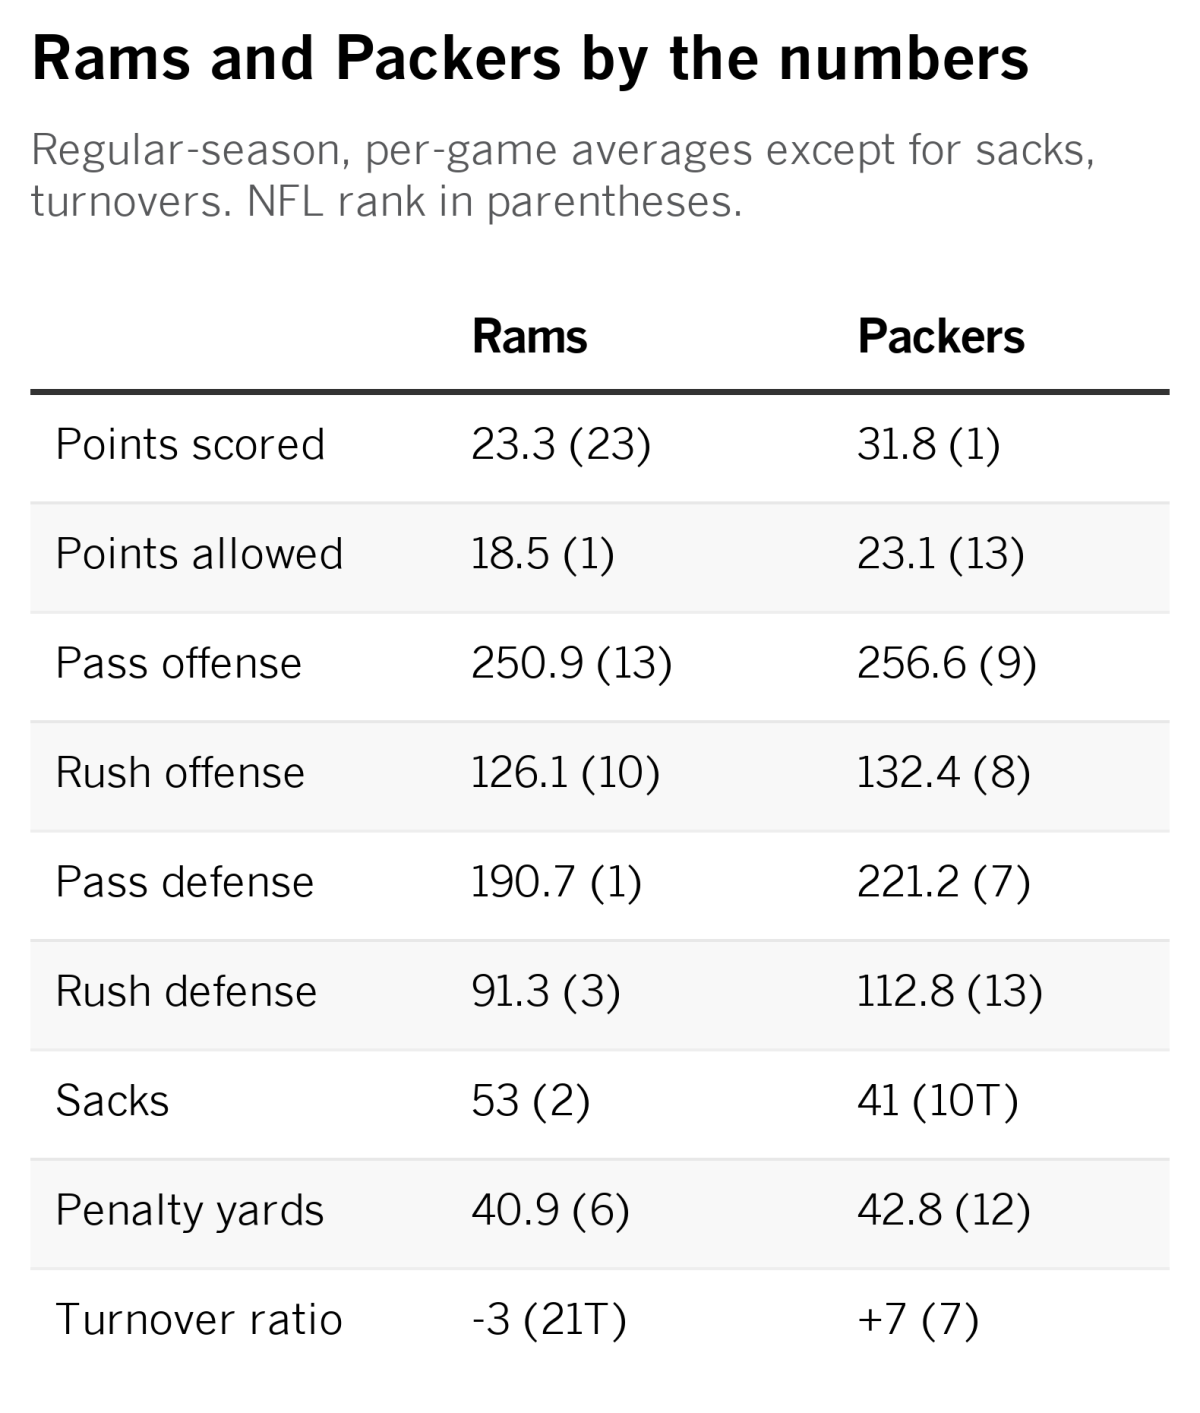 Rams and Packers numbers